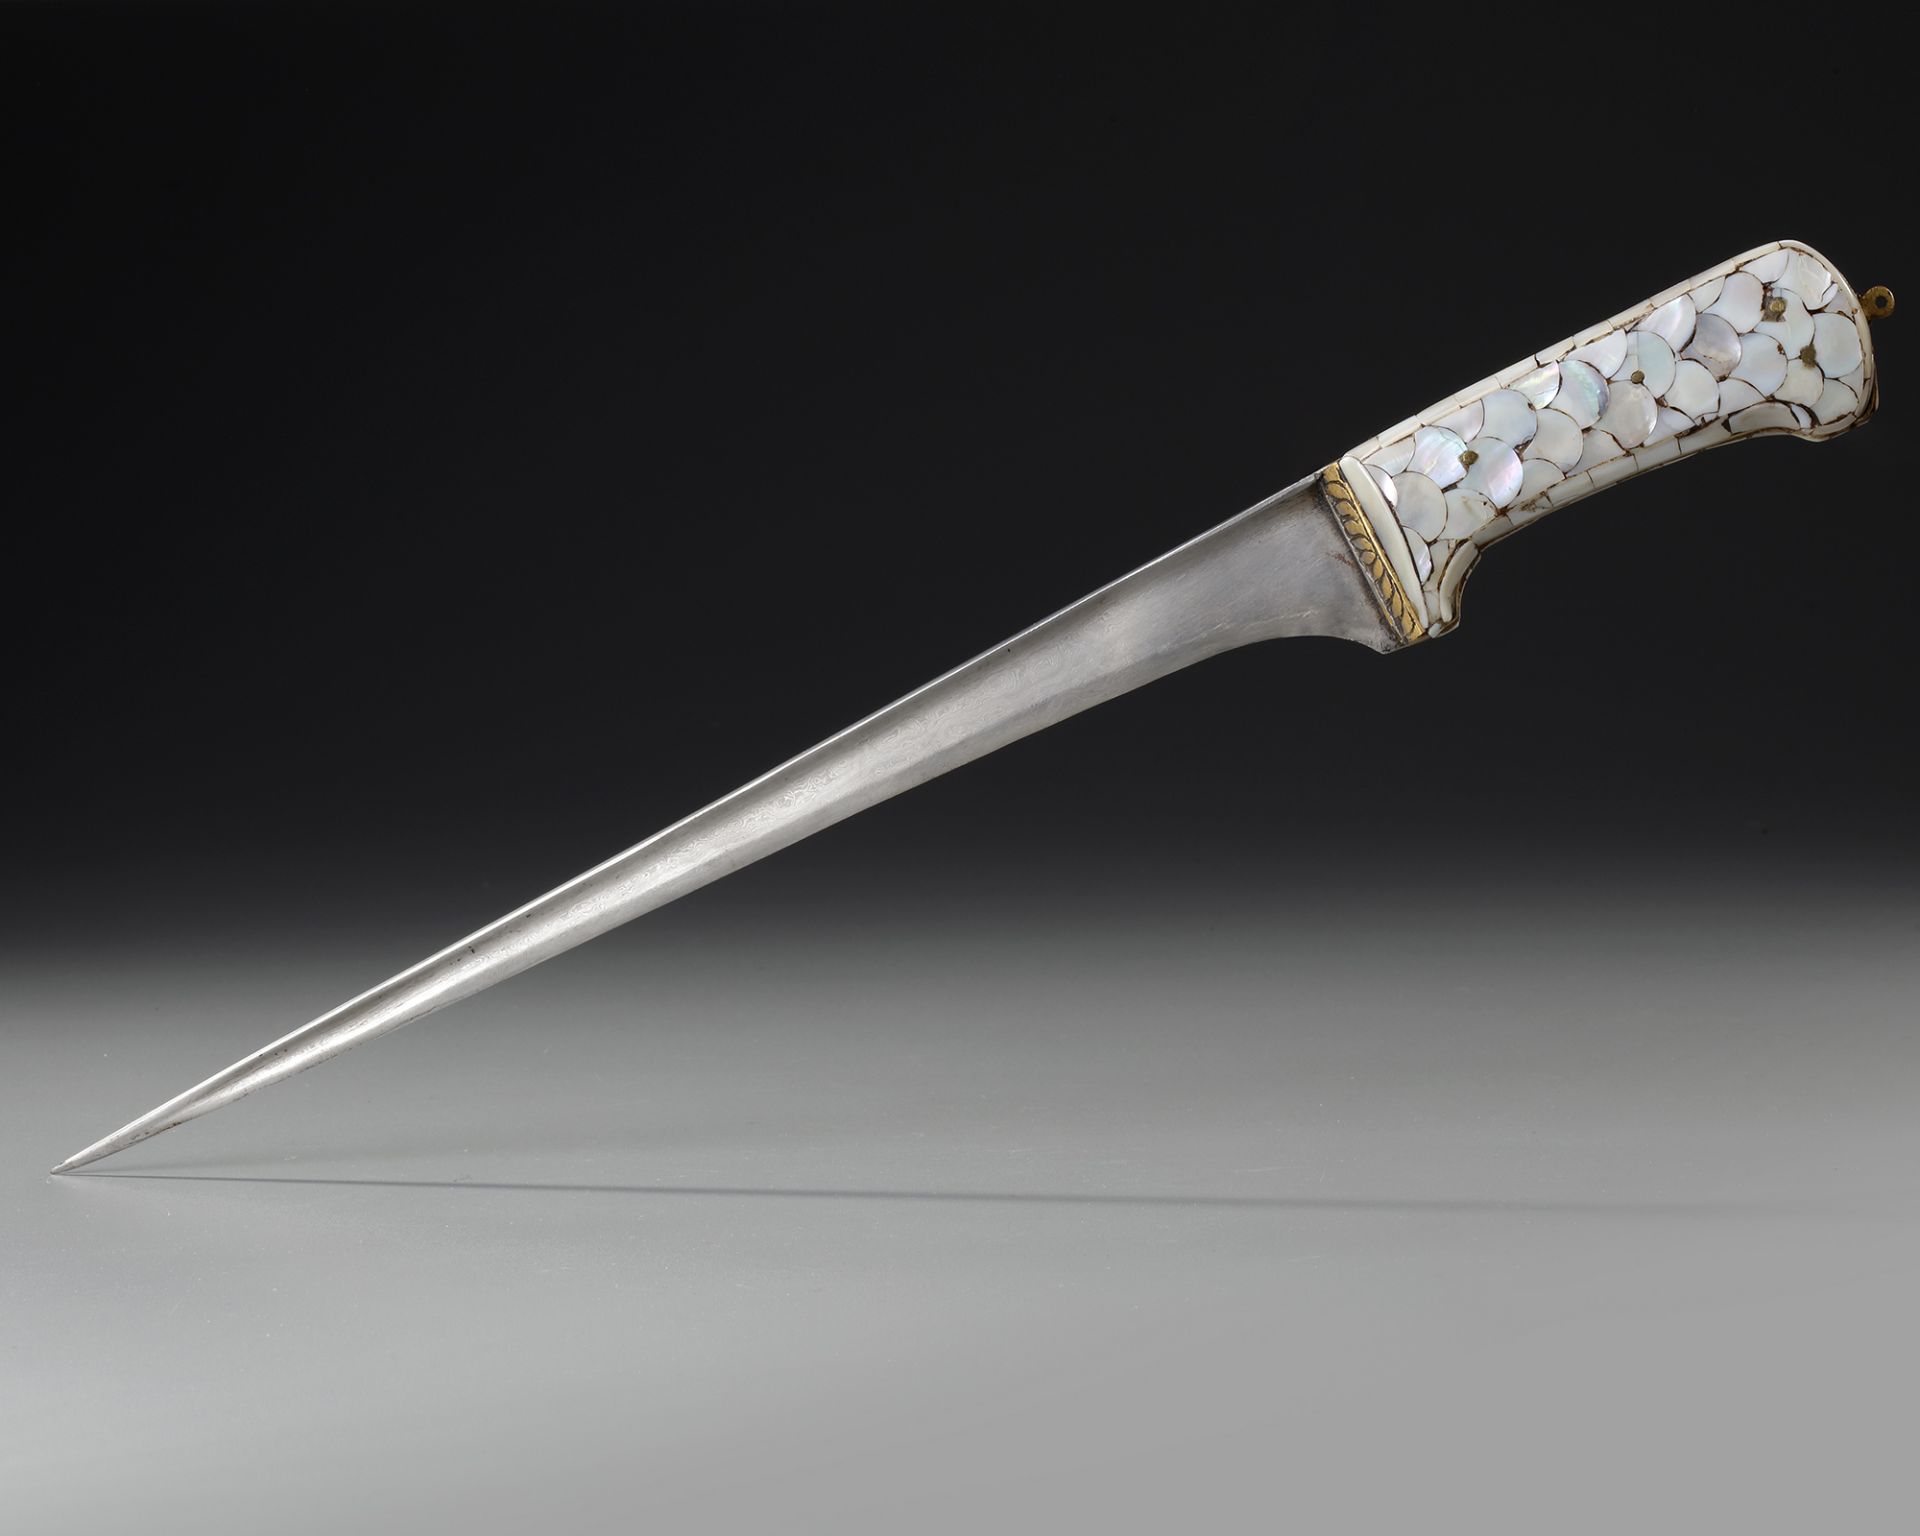 A MOTHER-OF-PEARL HILTED DAGGER (PESHKABZ), INDIA, GUJARAT, 18TH CENTURY - Image 3 of 5